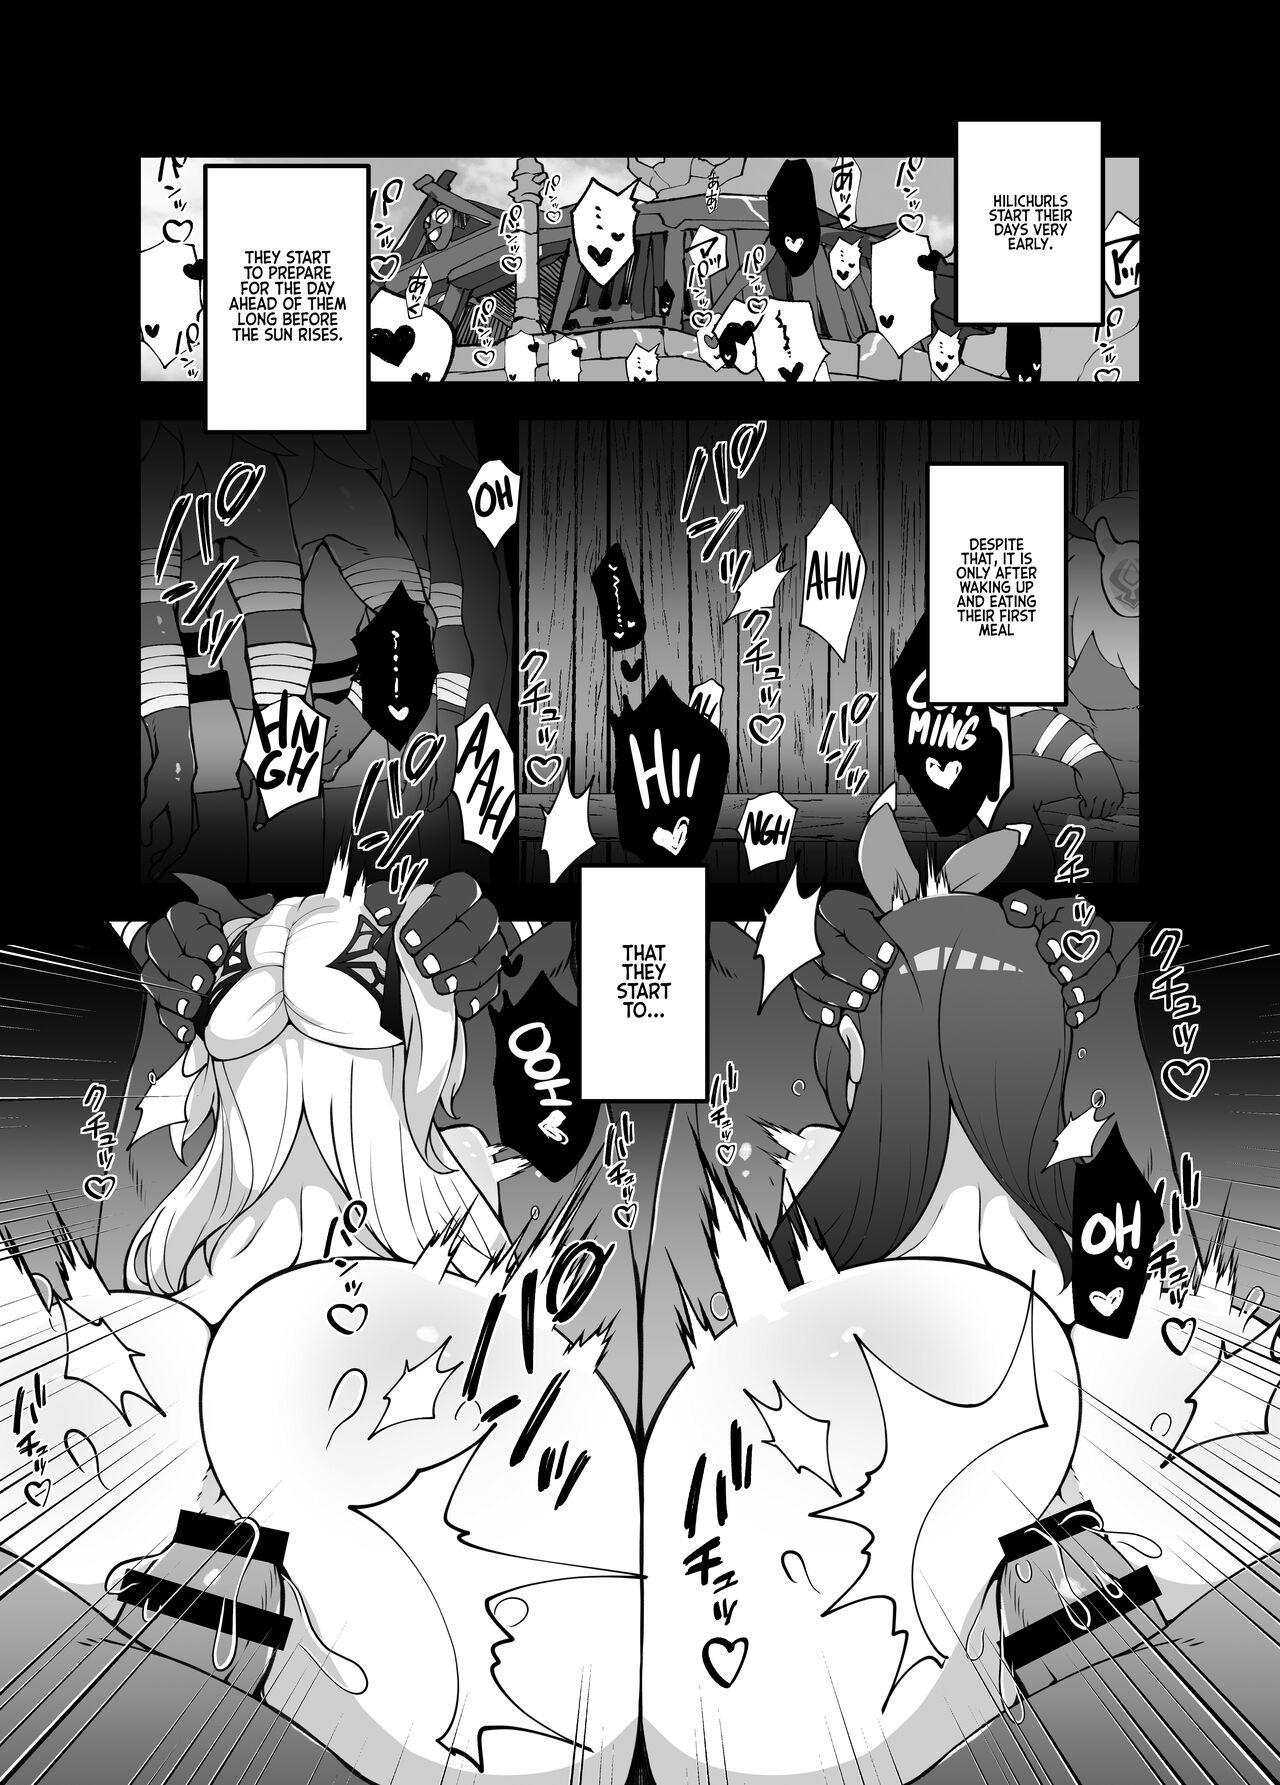 [Karouke (Karou)] The Attack of the Hilichurls II ~The Invasion's Prelude~ Noelle,Chivalric Blossom that withered~ (Genshin Impact) [English] [Kyuume] [Digital] 2